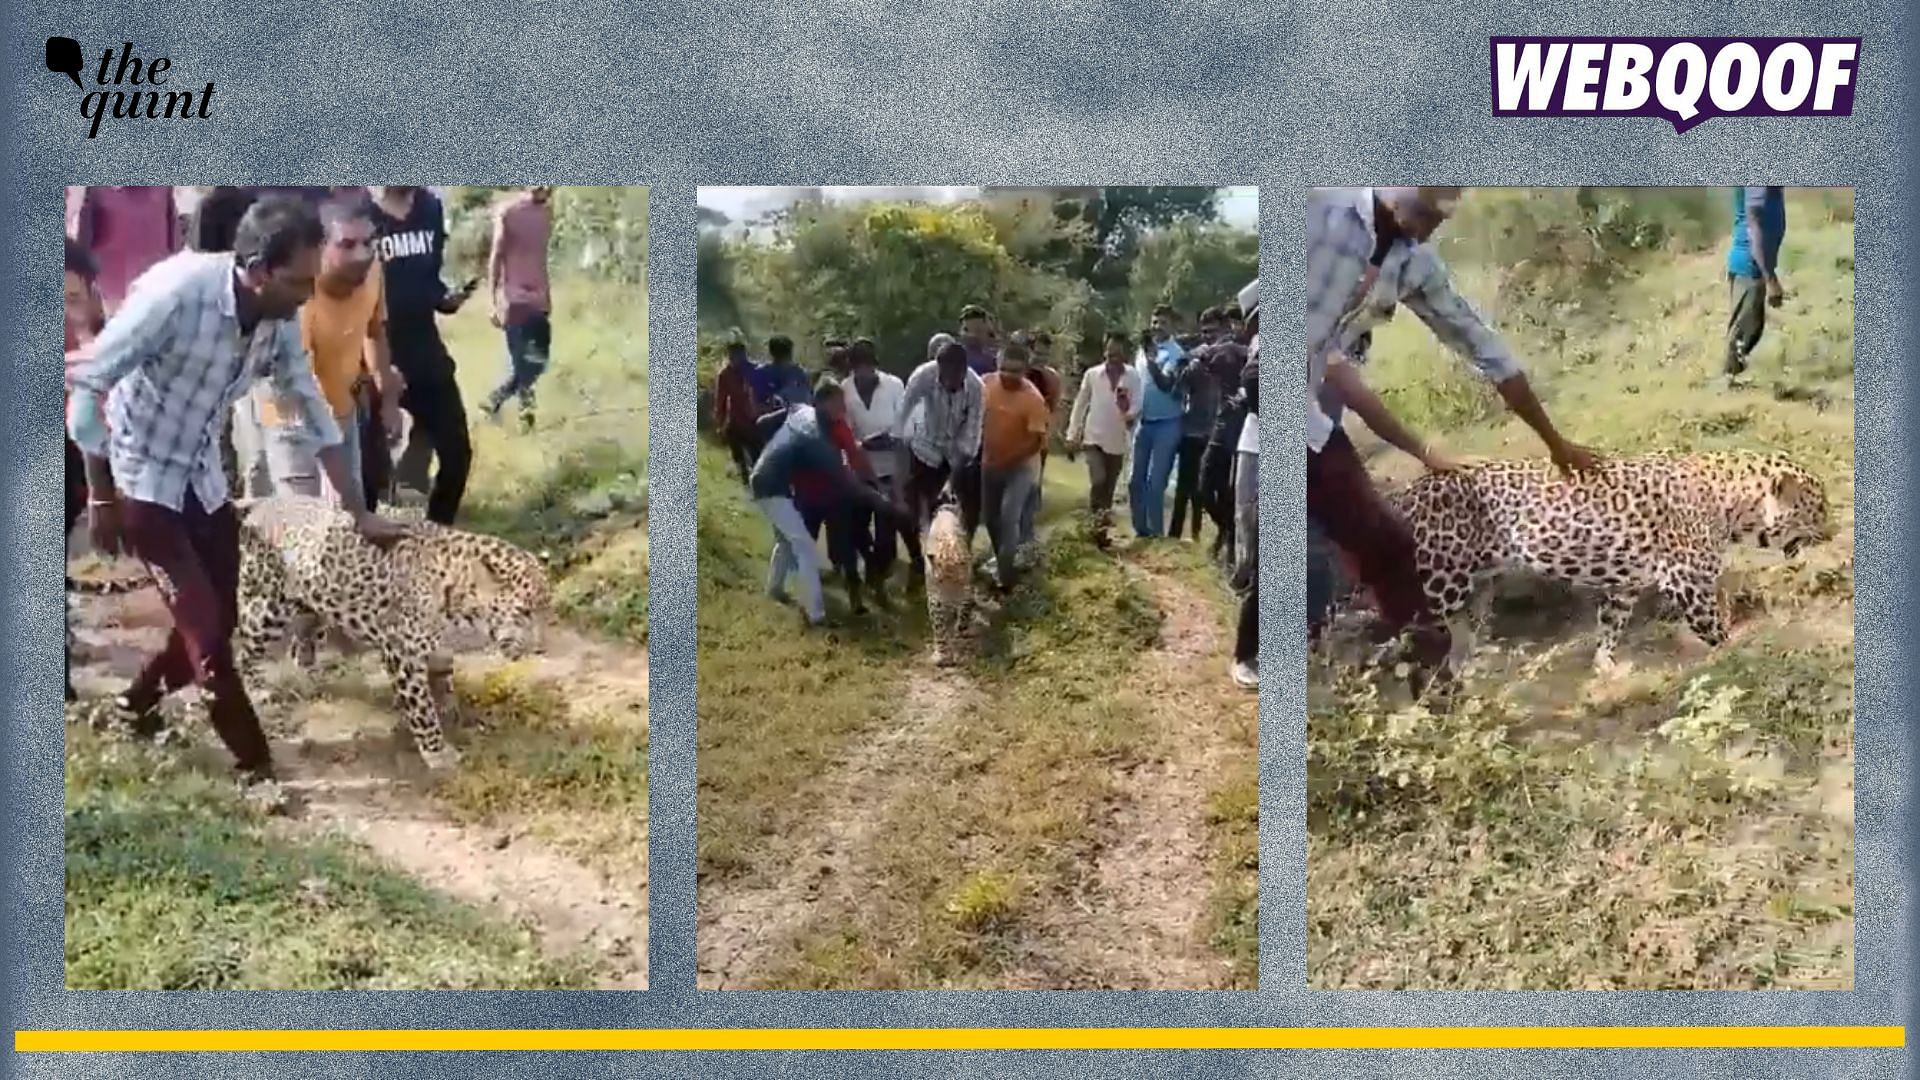 <div class="paragraphs"><p>Fact-Check: A video of a sick leopard being abused in Madhya Pradesh's forest is being shared with a misleading context about the animal being intoxicated.</p></div>